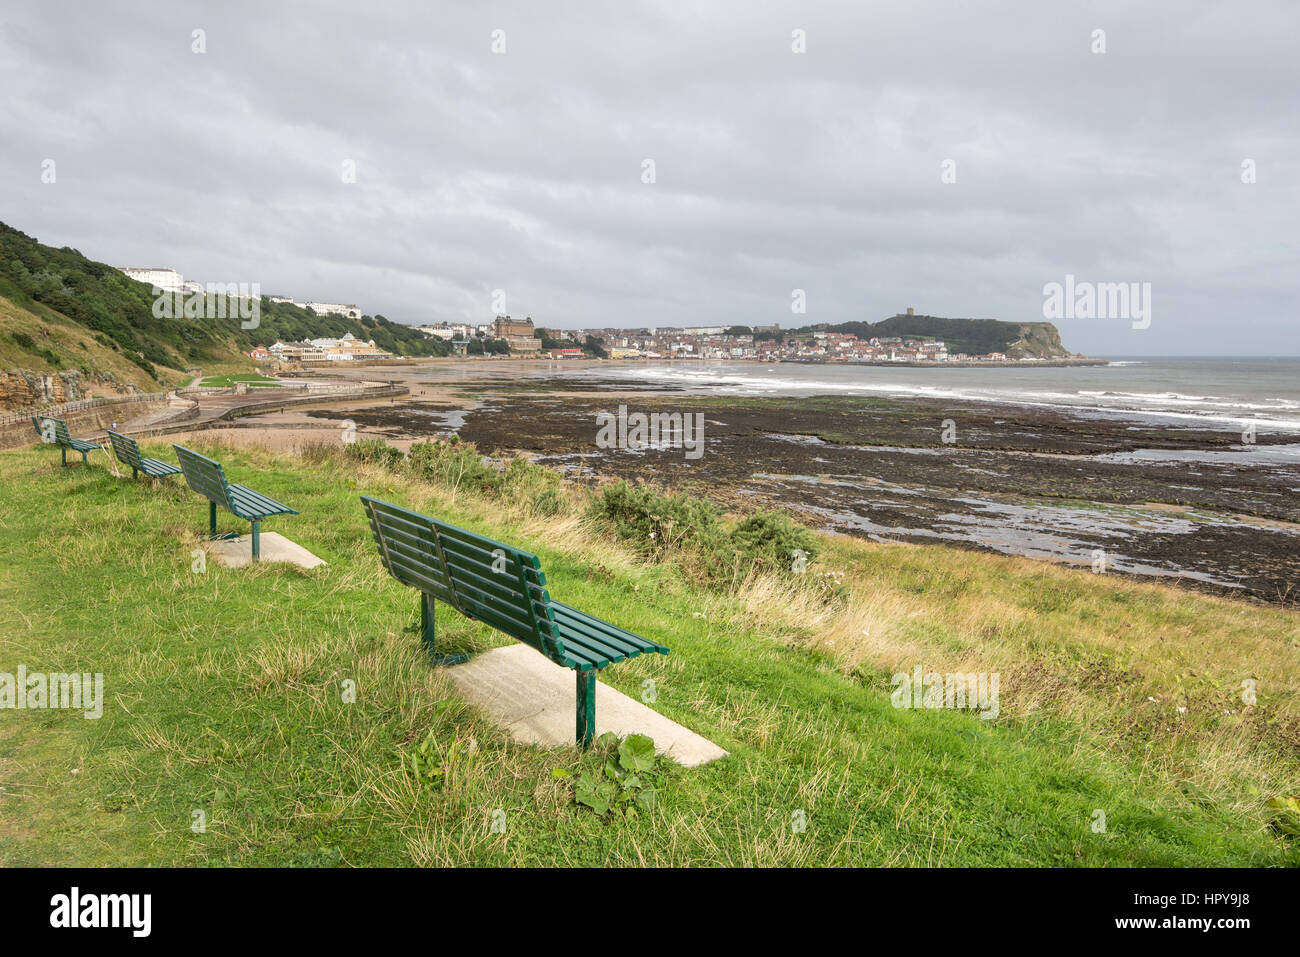 Bench with view of Scaborough, a seaside town on the east coast of England. Stock Photo